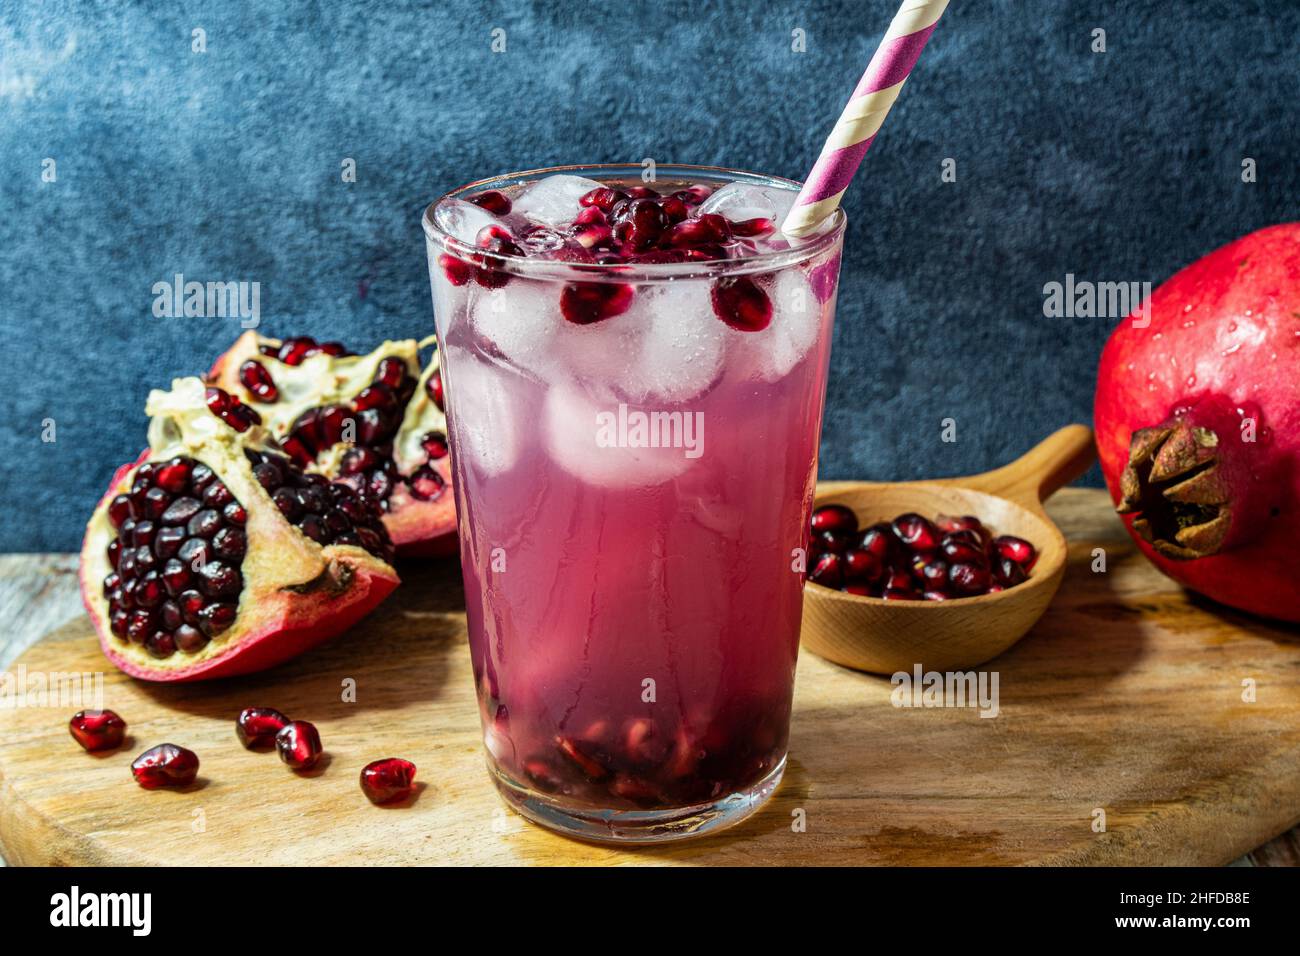 Healthy pomegranate juice, served with ice and straw Stock Photo